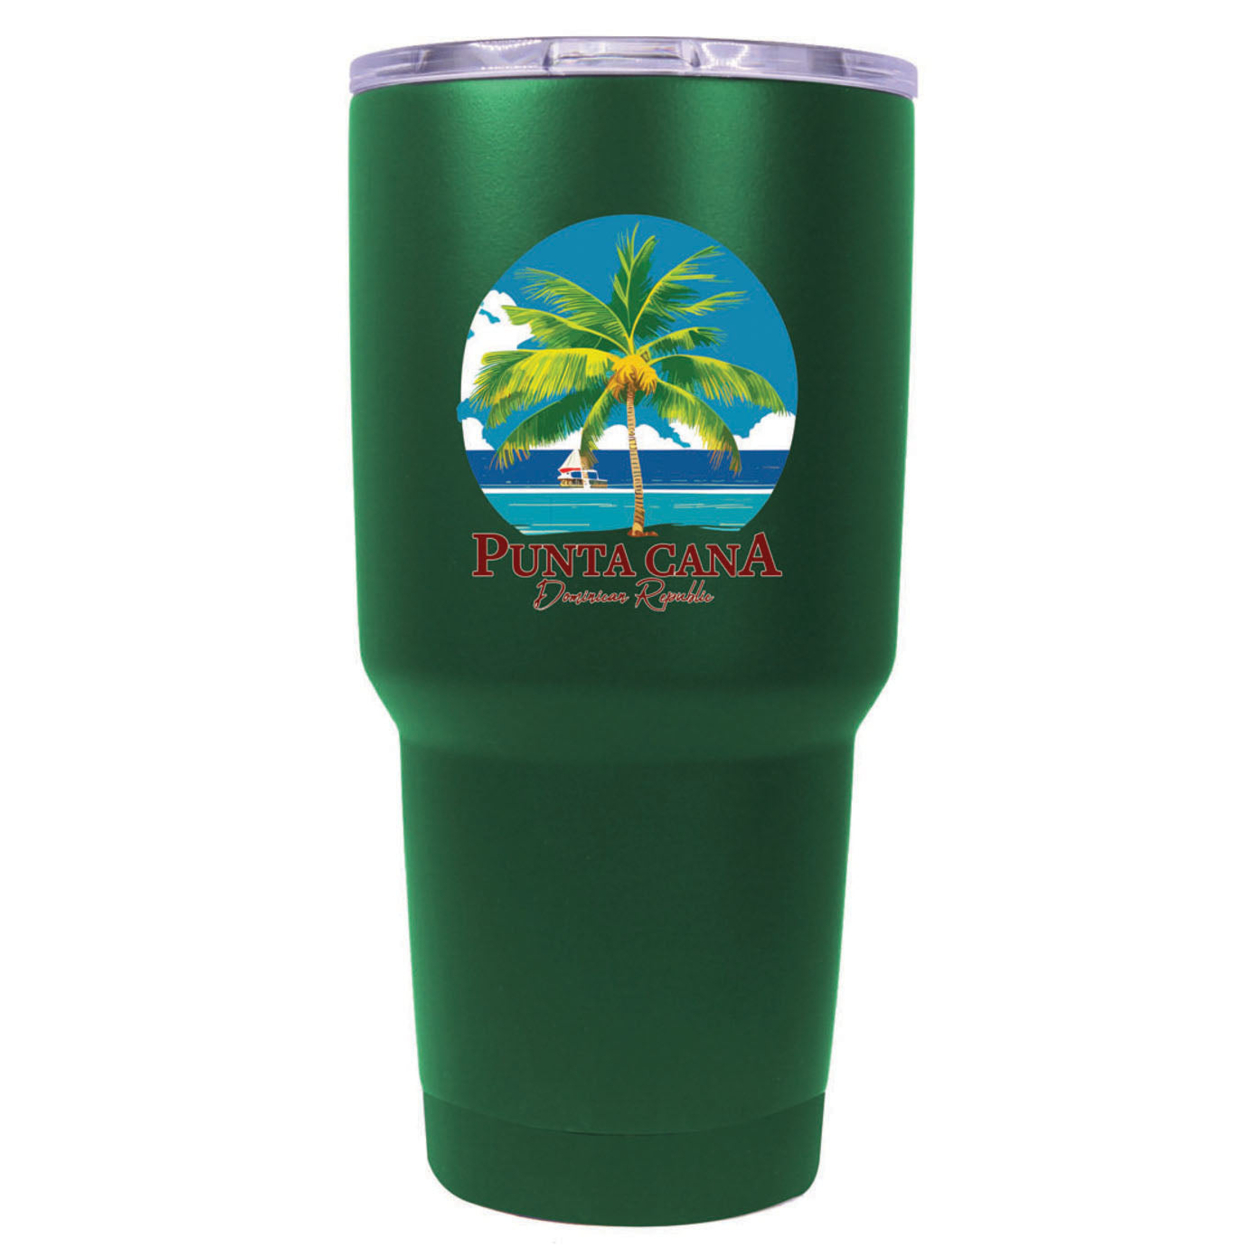 Punta Cana Dominican Republic Souvenir 24 Oz Insulated Stainless Steel Tumbler - Red, PARROT